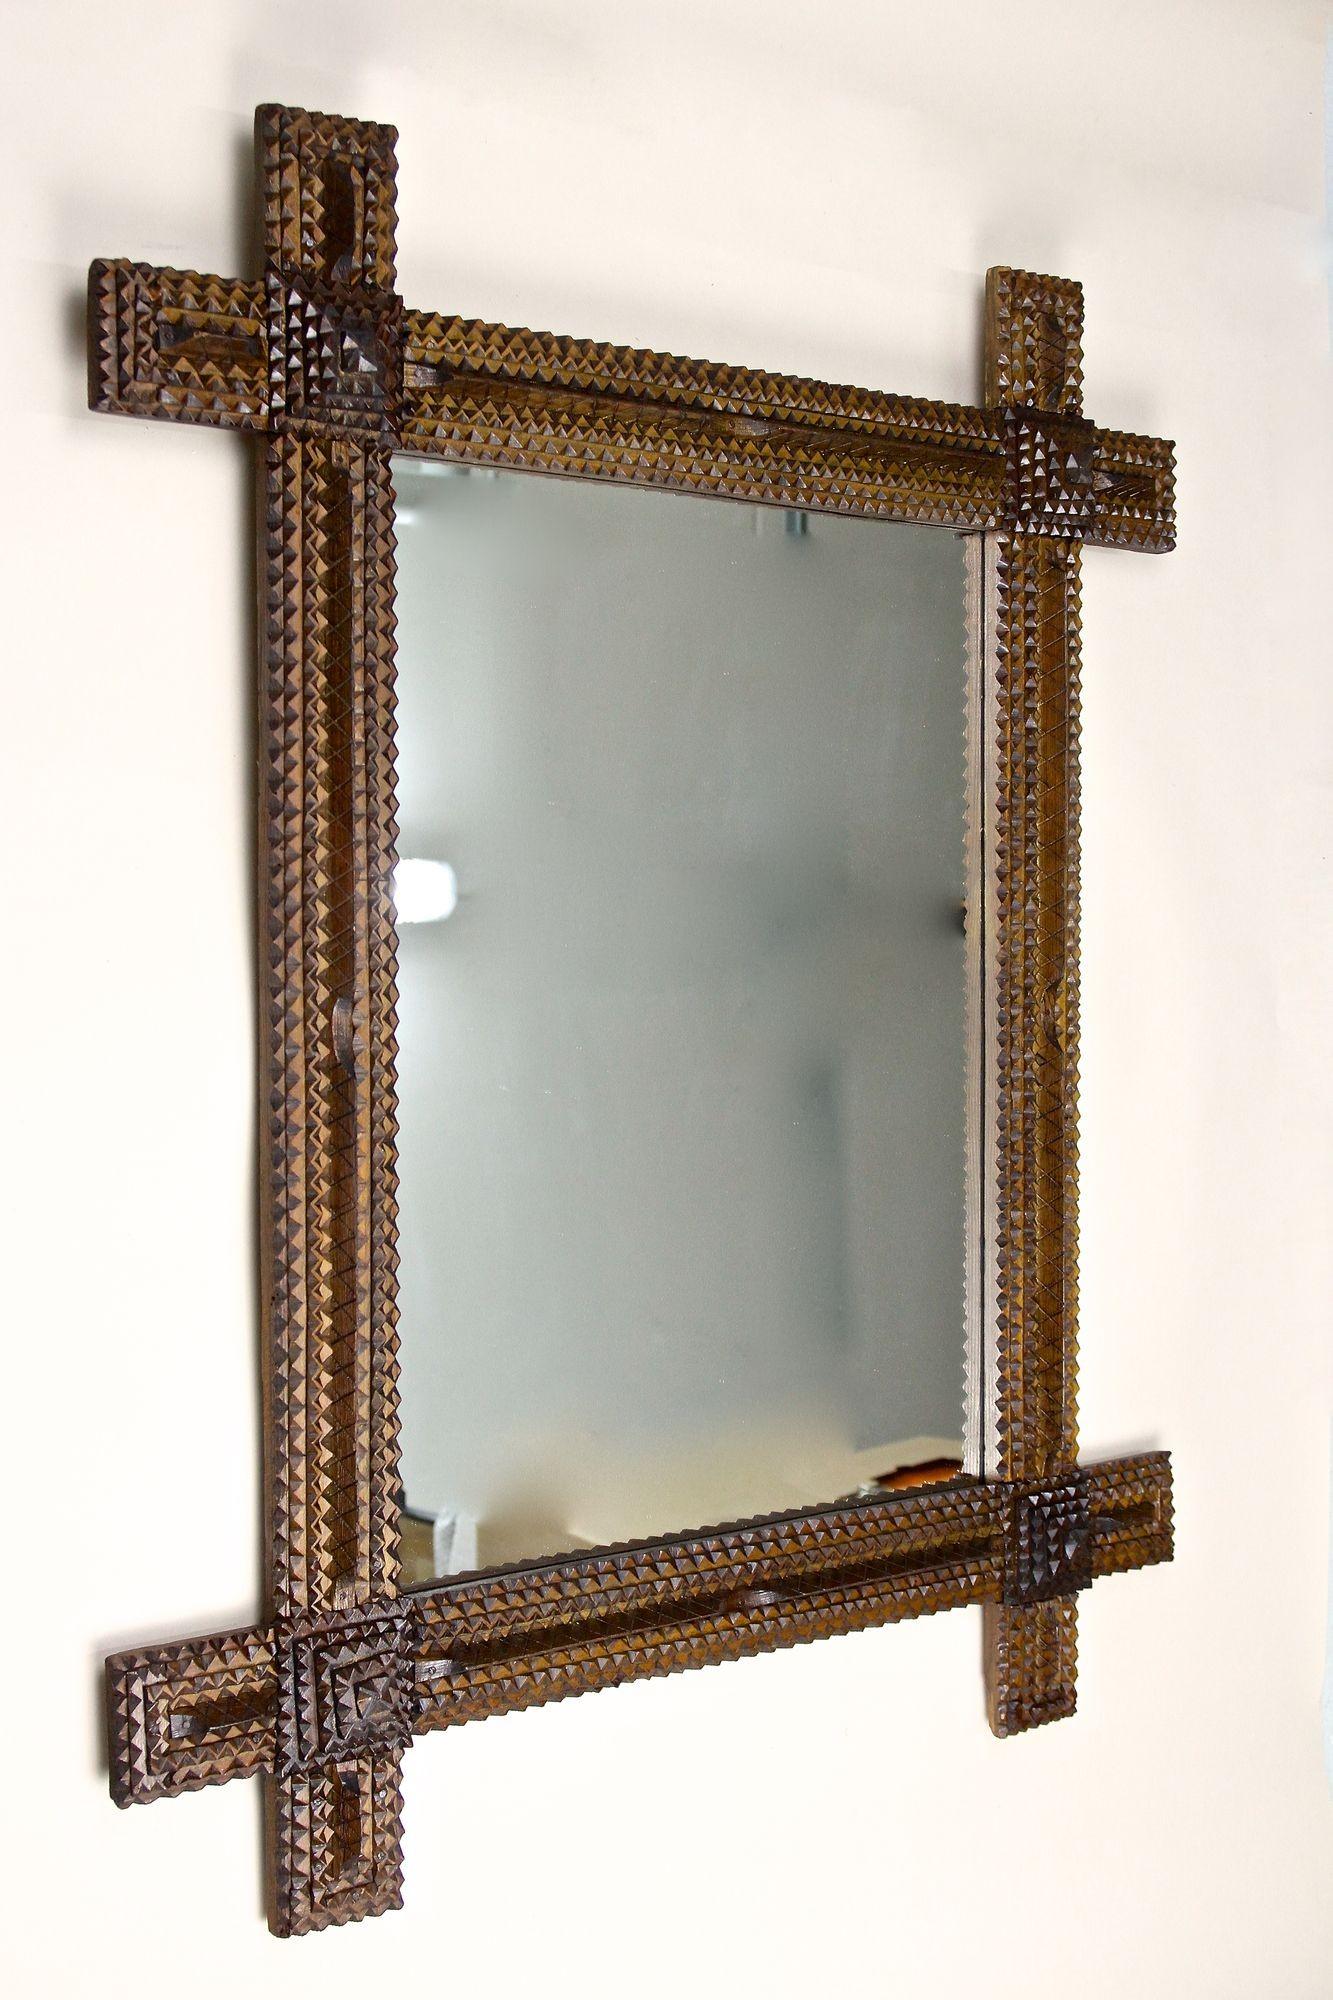 Extraordinary, large rustic Tramp Art wall mirror from the late 19th century around 1870 in Austria. This very special crafted, elaborately made rural wall mirror impresses with its amazing looking variety of different elements: pyramid styled